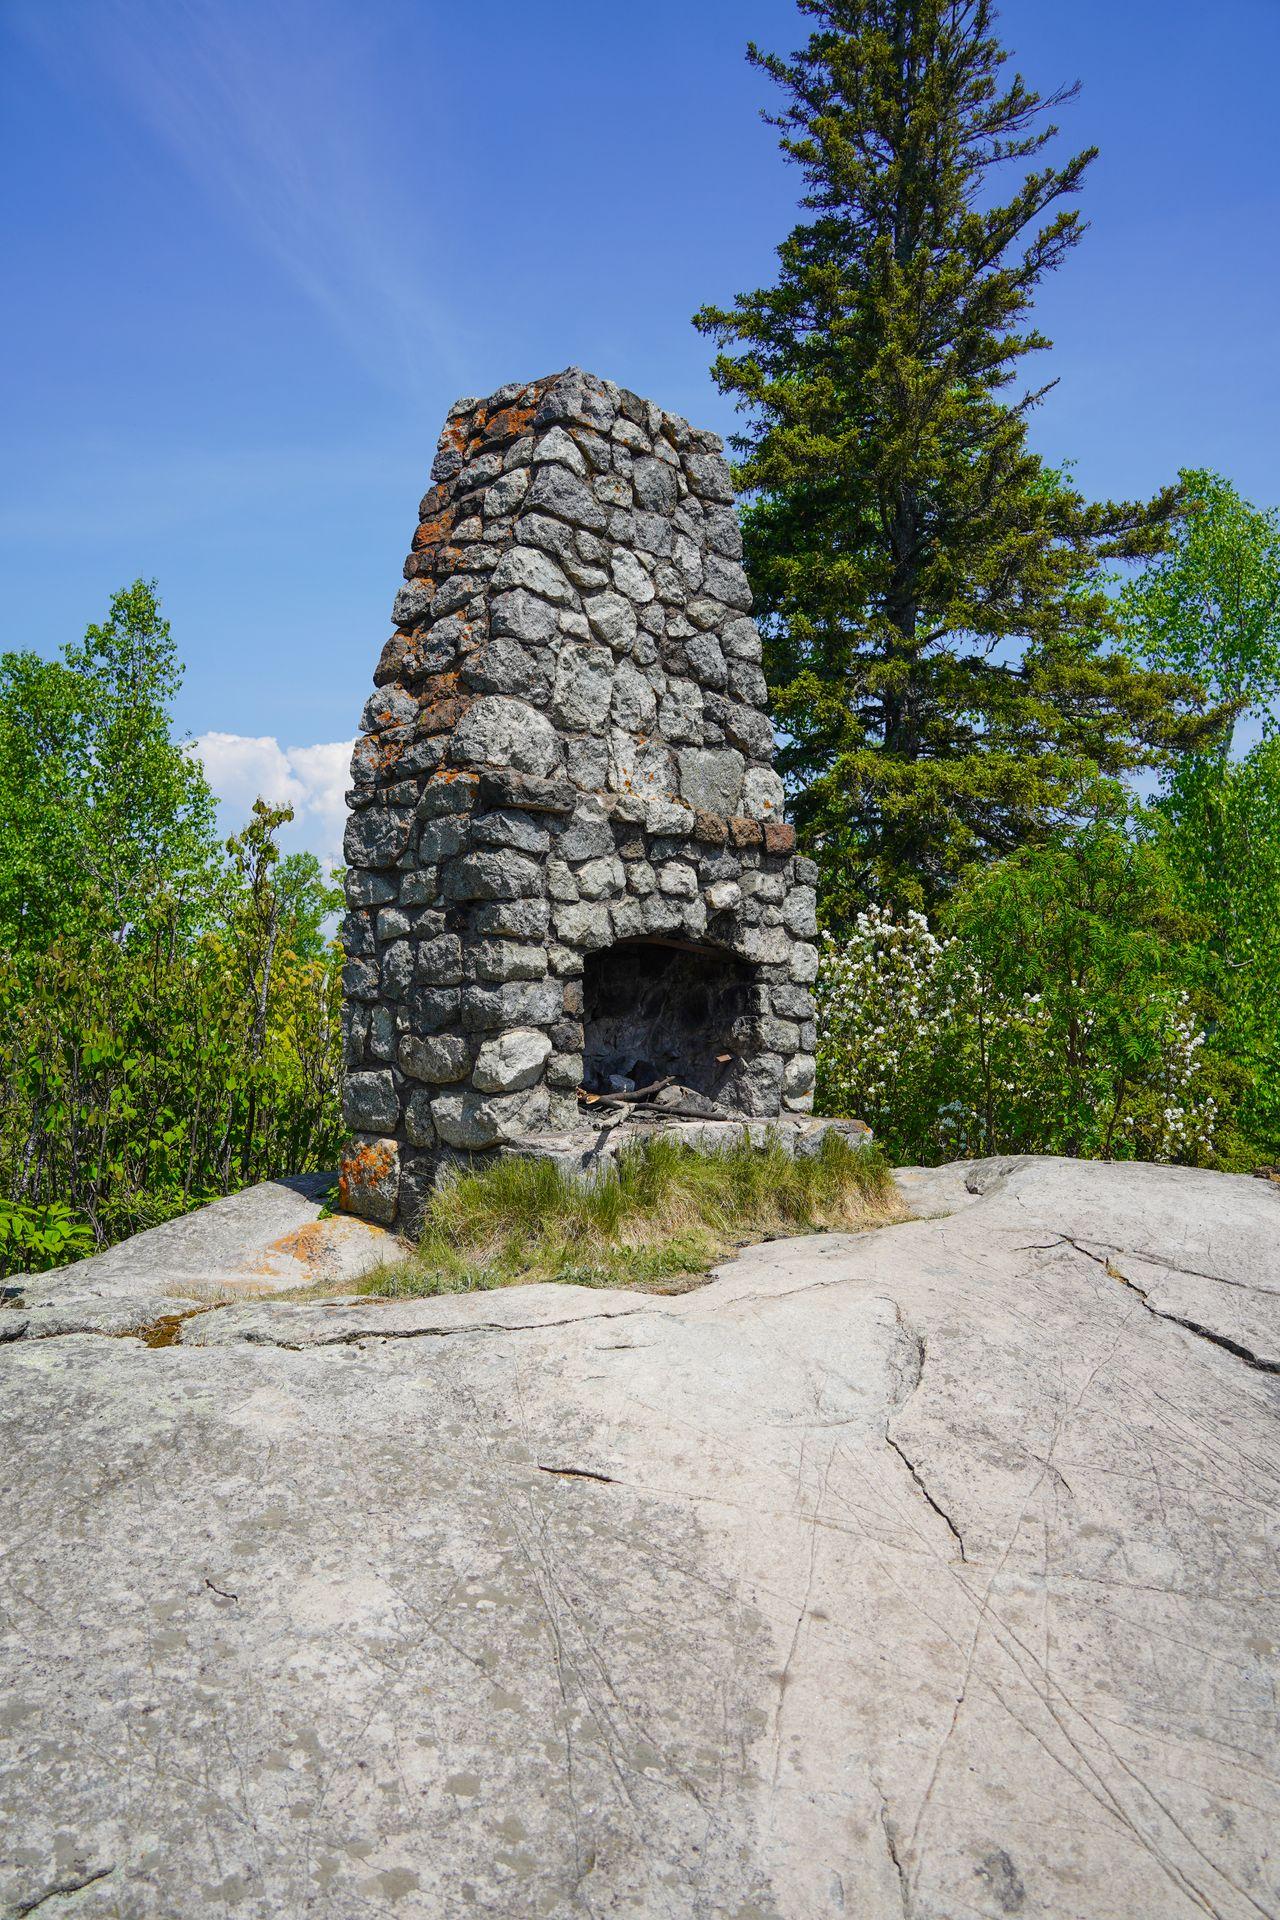 A stone fireplace stands on it's own, surrounded by rock and some trees.